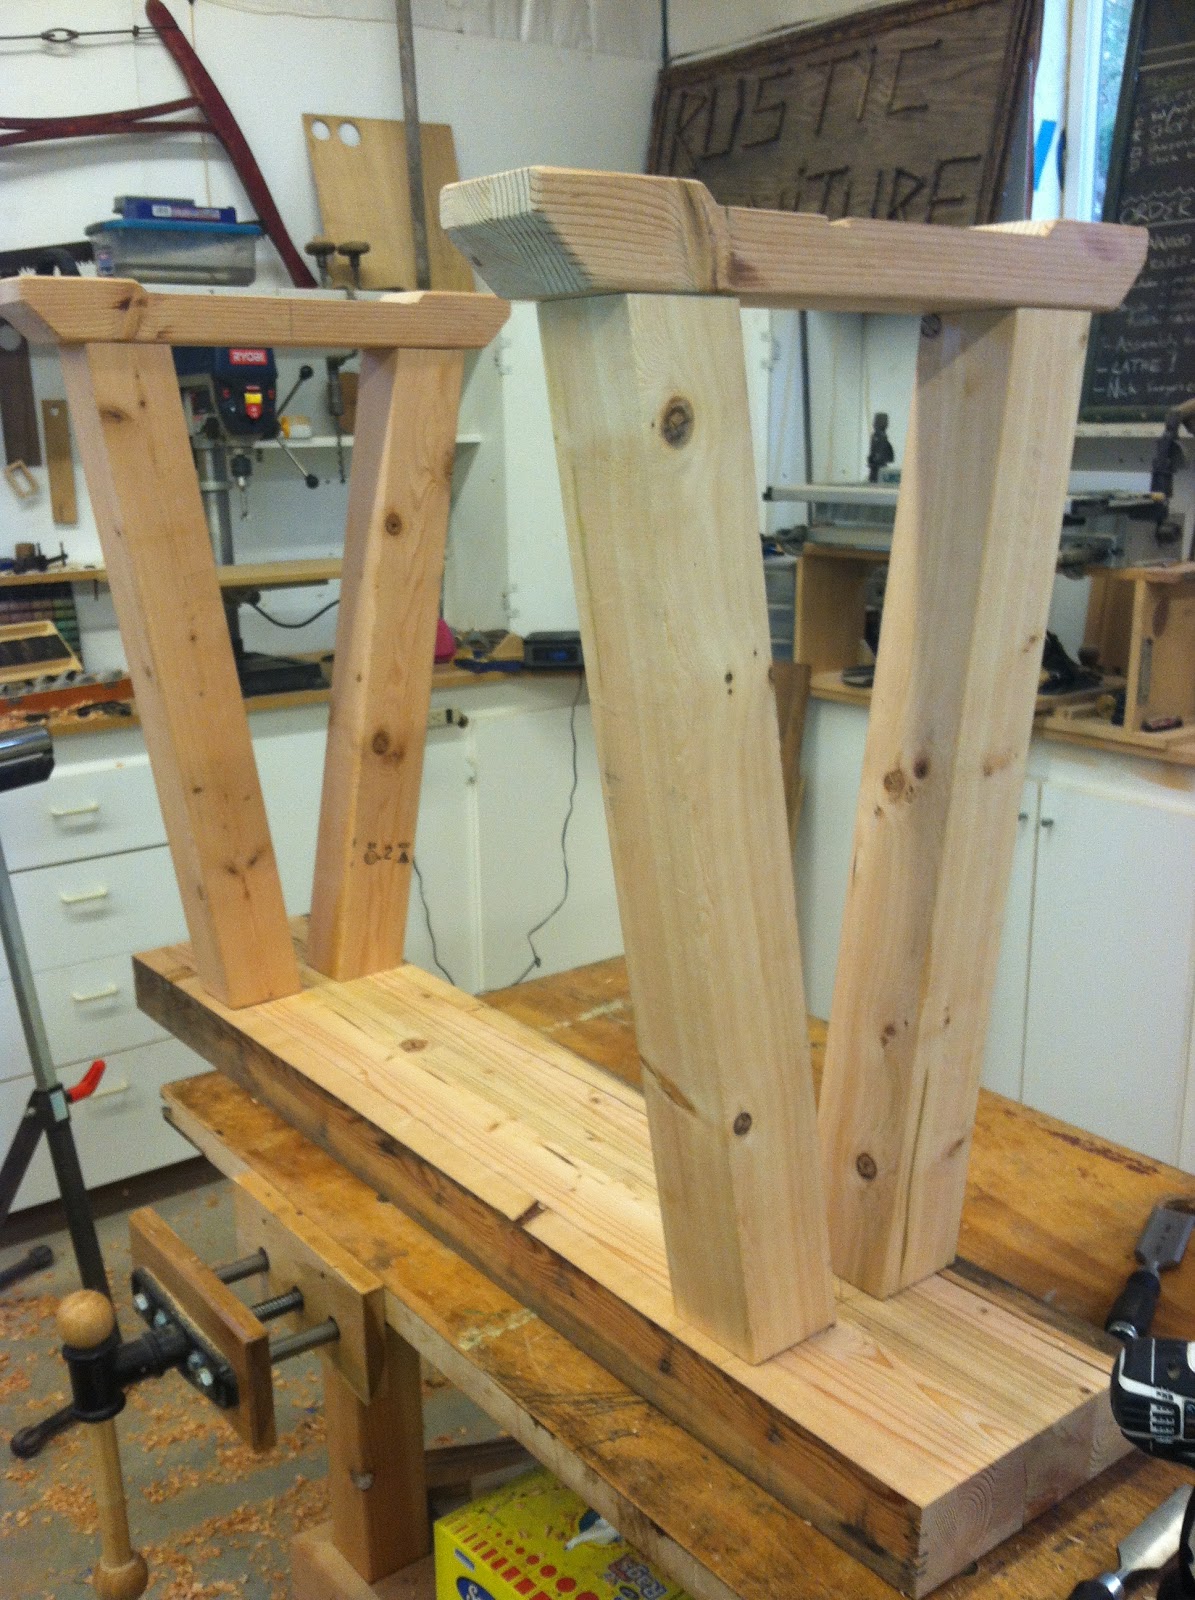 RusticWorks - Wood Working Photo Journal: Lathe Stand Build, from